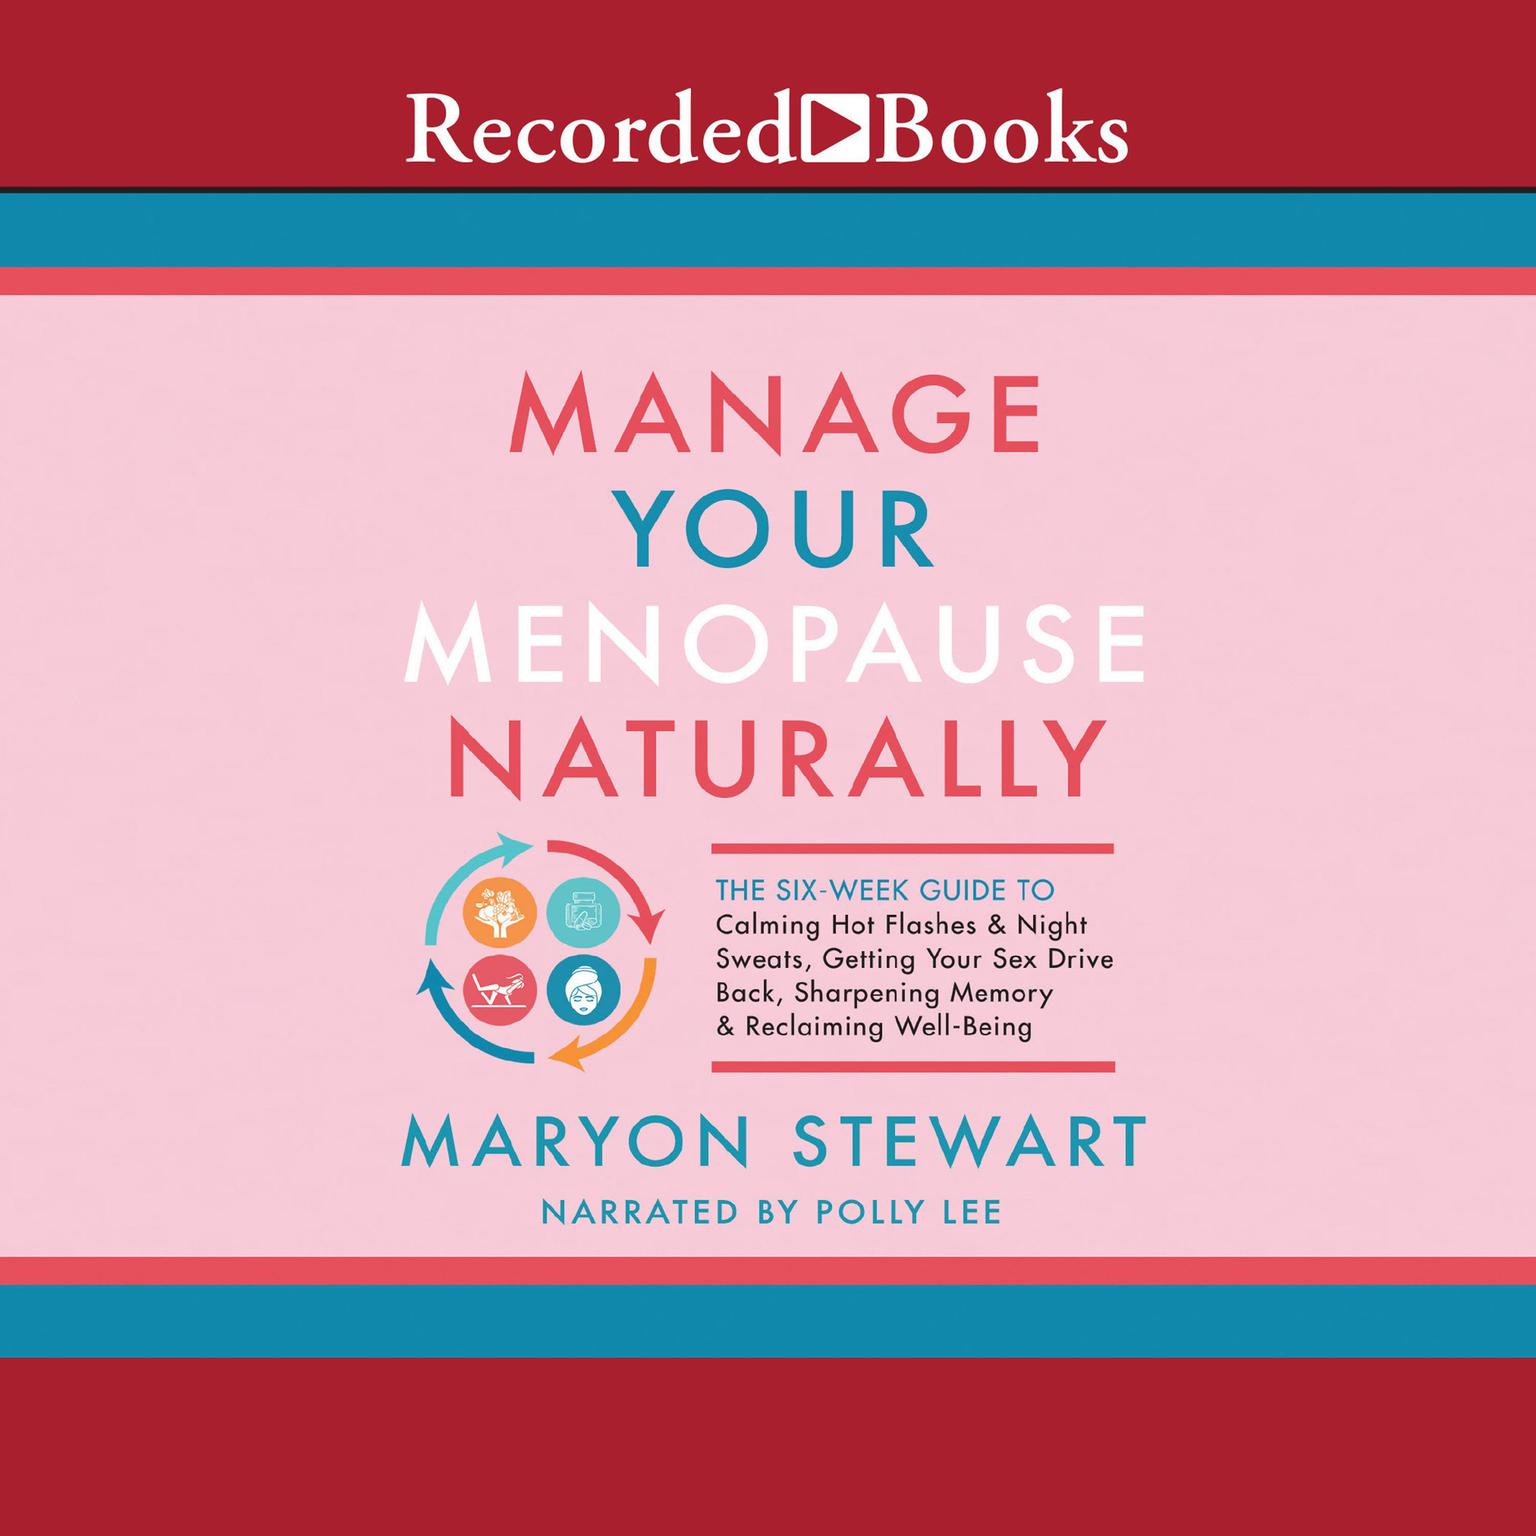 Manage Your Menopause Naturally: The Six-Week Guide to Calming Hot Flashes & Night Sweats, Getting Your Sex Drive Back, Sharpening Memory & Reclaiming Well-Being Audiobook, by Maryon Stewart